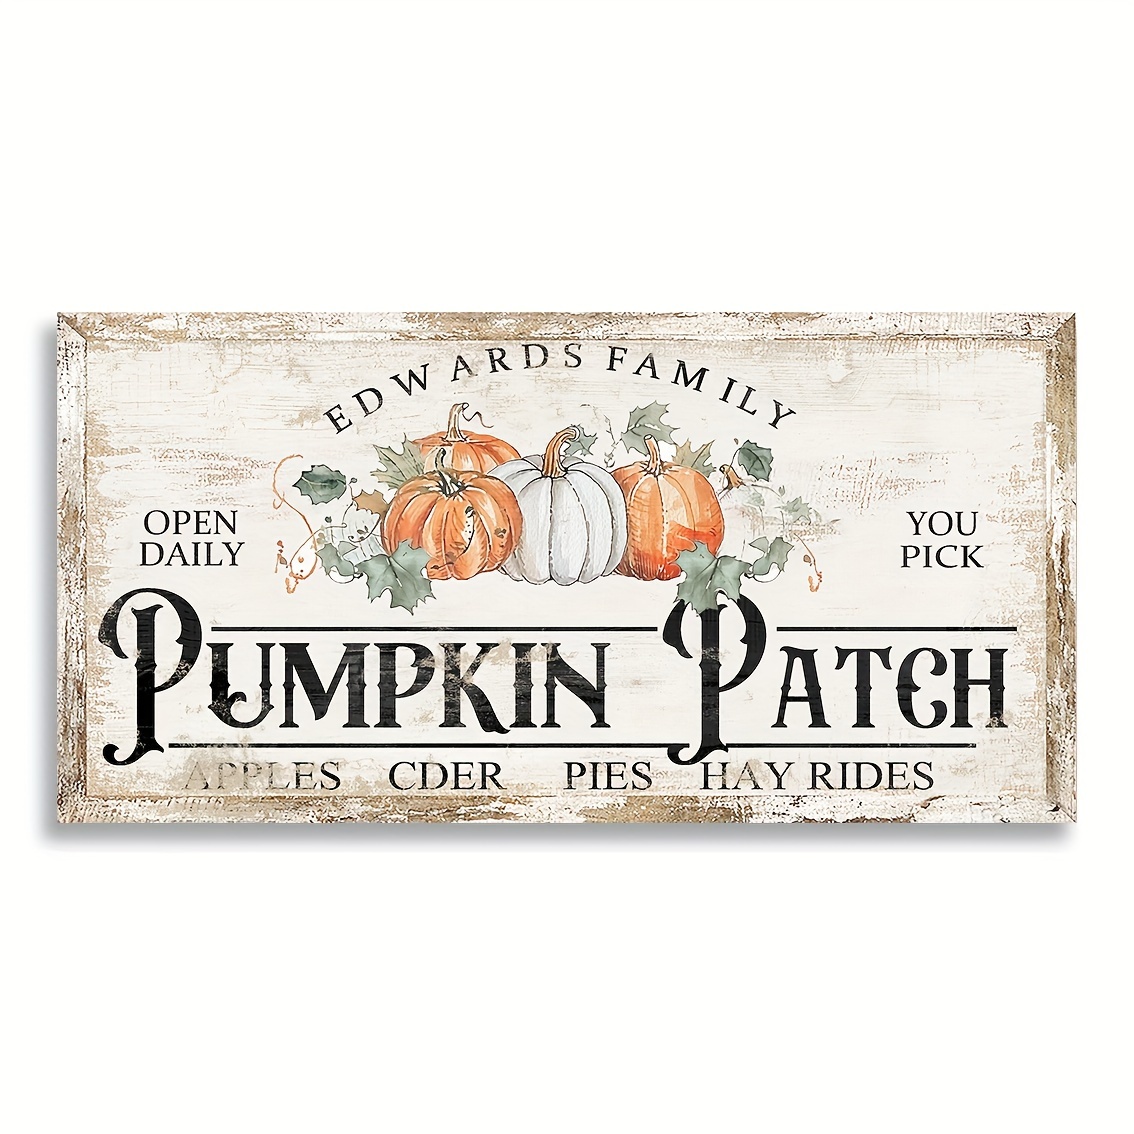 

Vintage Pumpkin Patch Decorative Sign - Rustic Harvest Market Wooden Wall Hanging Plaque, Multipurpose Autumn Decor For Home, Bedroom, Farmhouse - 12x6 Inches